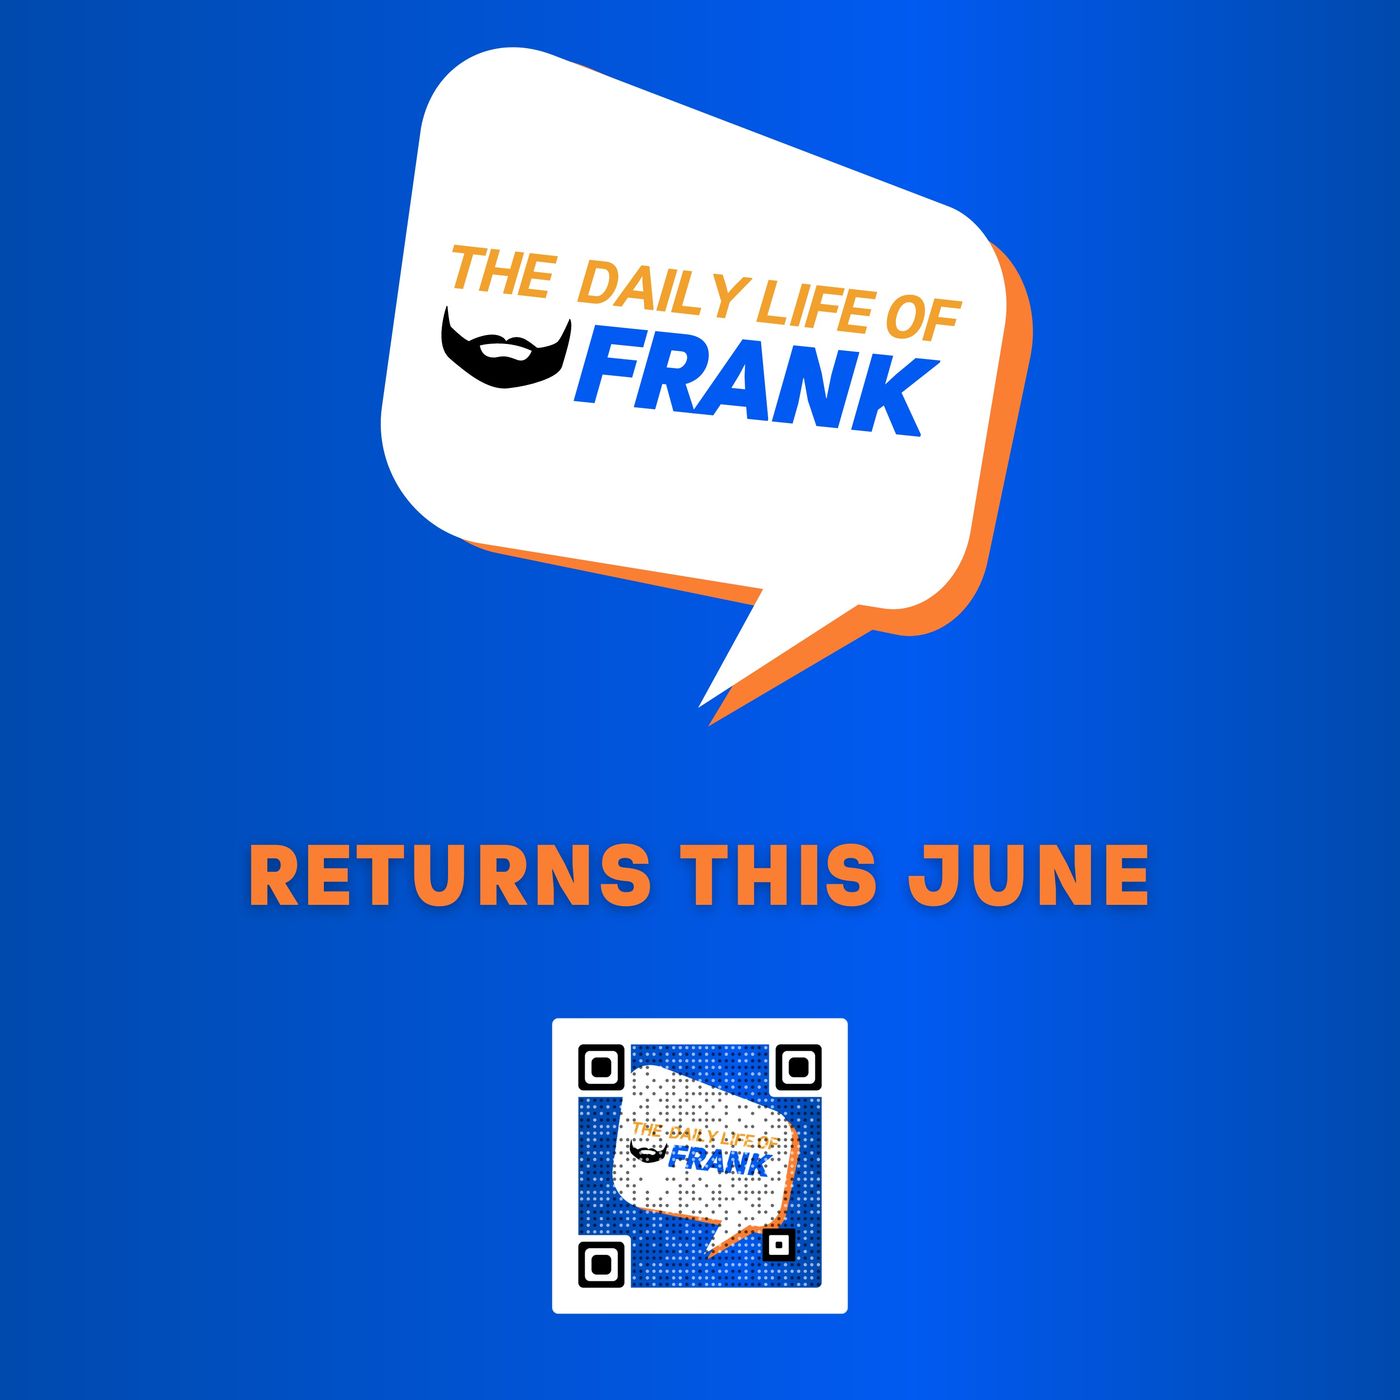 The Daily Life of Frank Returns this June